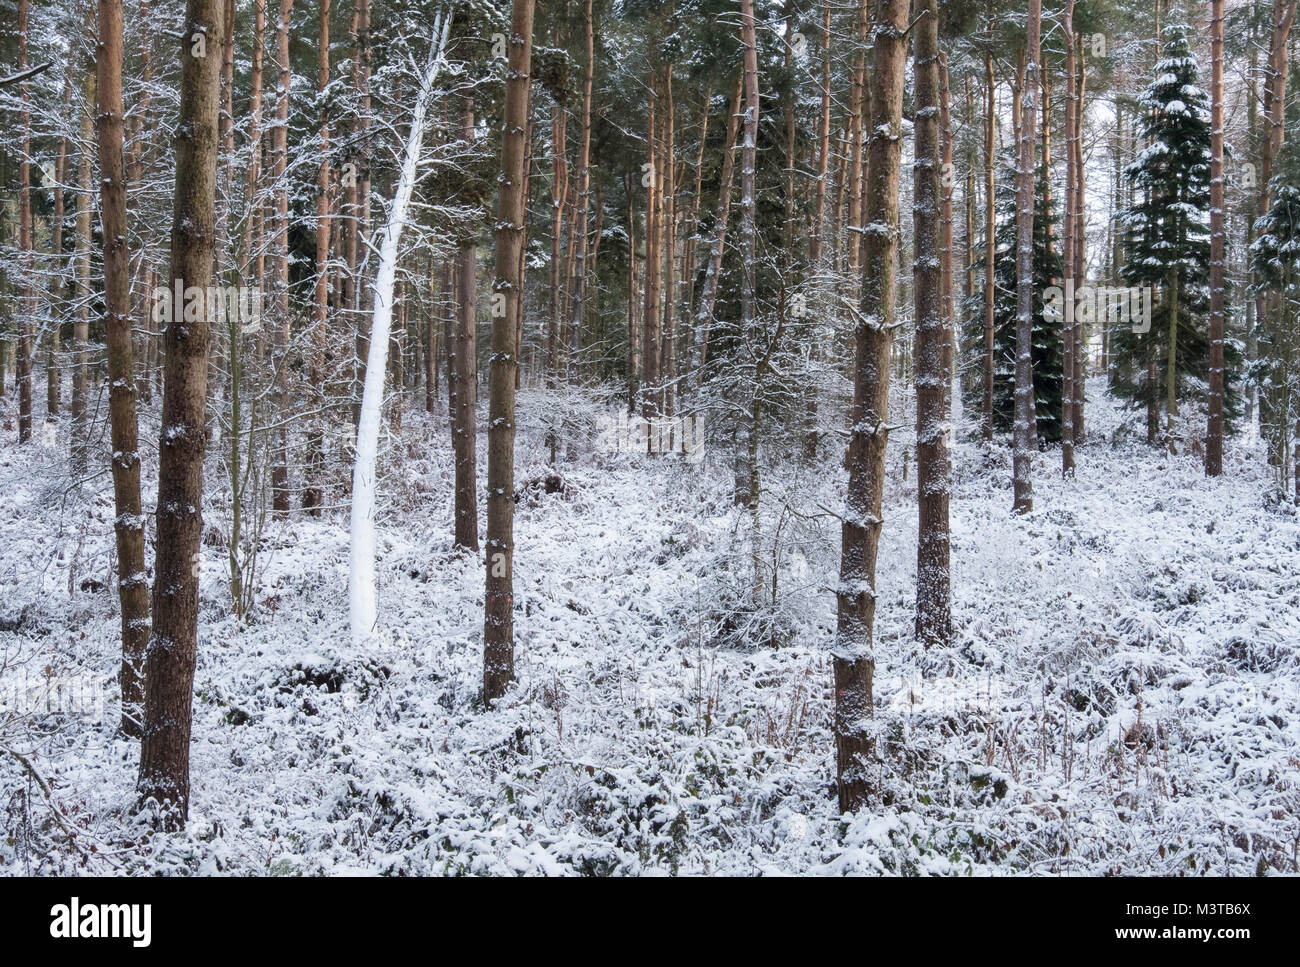 Delamere Forest in Winter, Delamere, Cheshire, England, UK Stock Photo